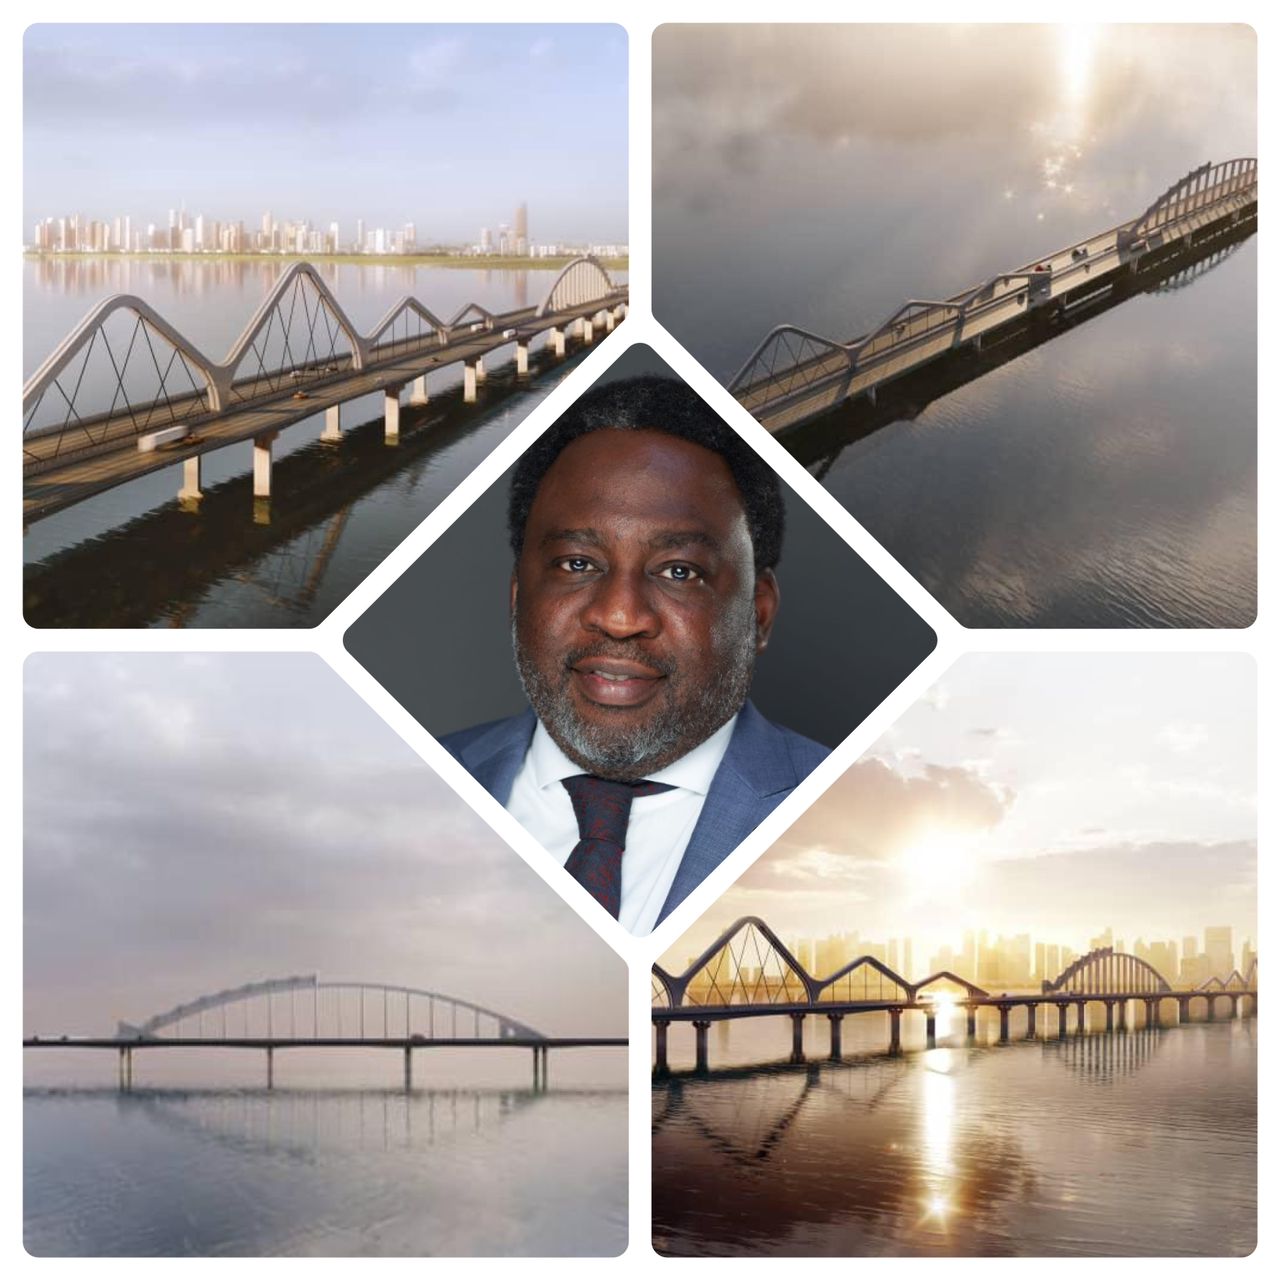 <a href="https://www.nairaland.com/7454360/lasg-gives-update-construction-fourth#118738313">LASG Gives Update On The Construction Of The Fourth Mainland Bridge</a>